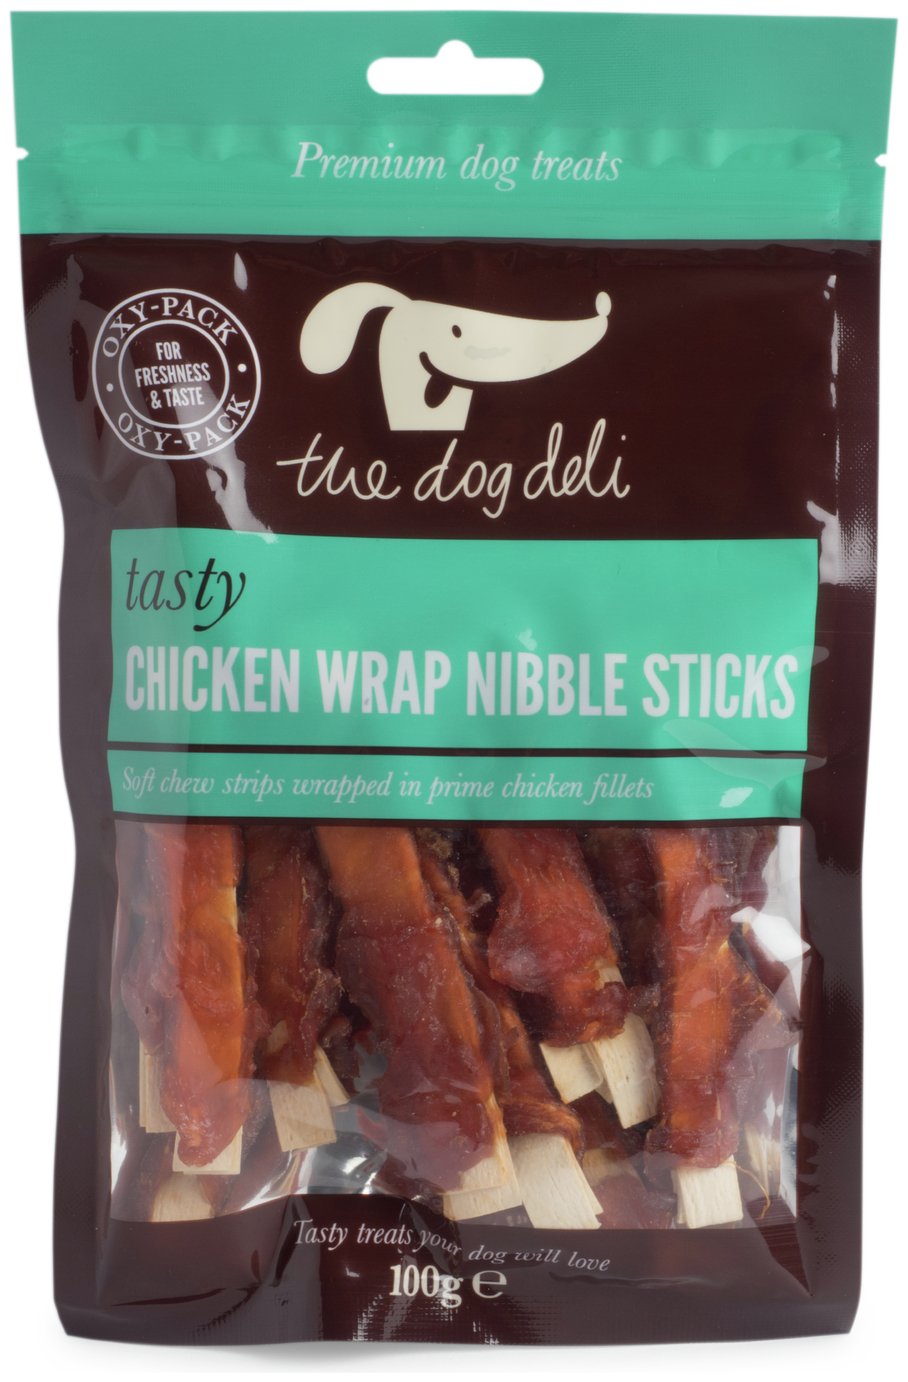 Petface 100g Pack of Chicken Wrap Nibble Sticks review